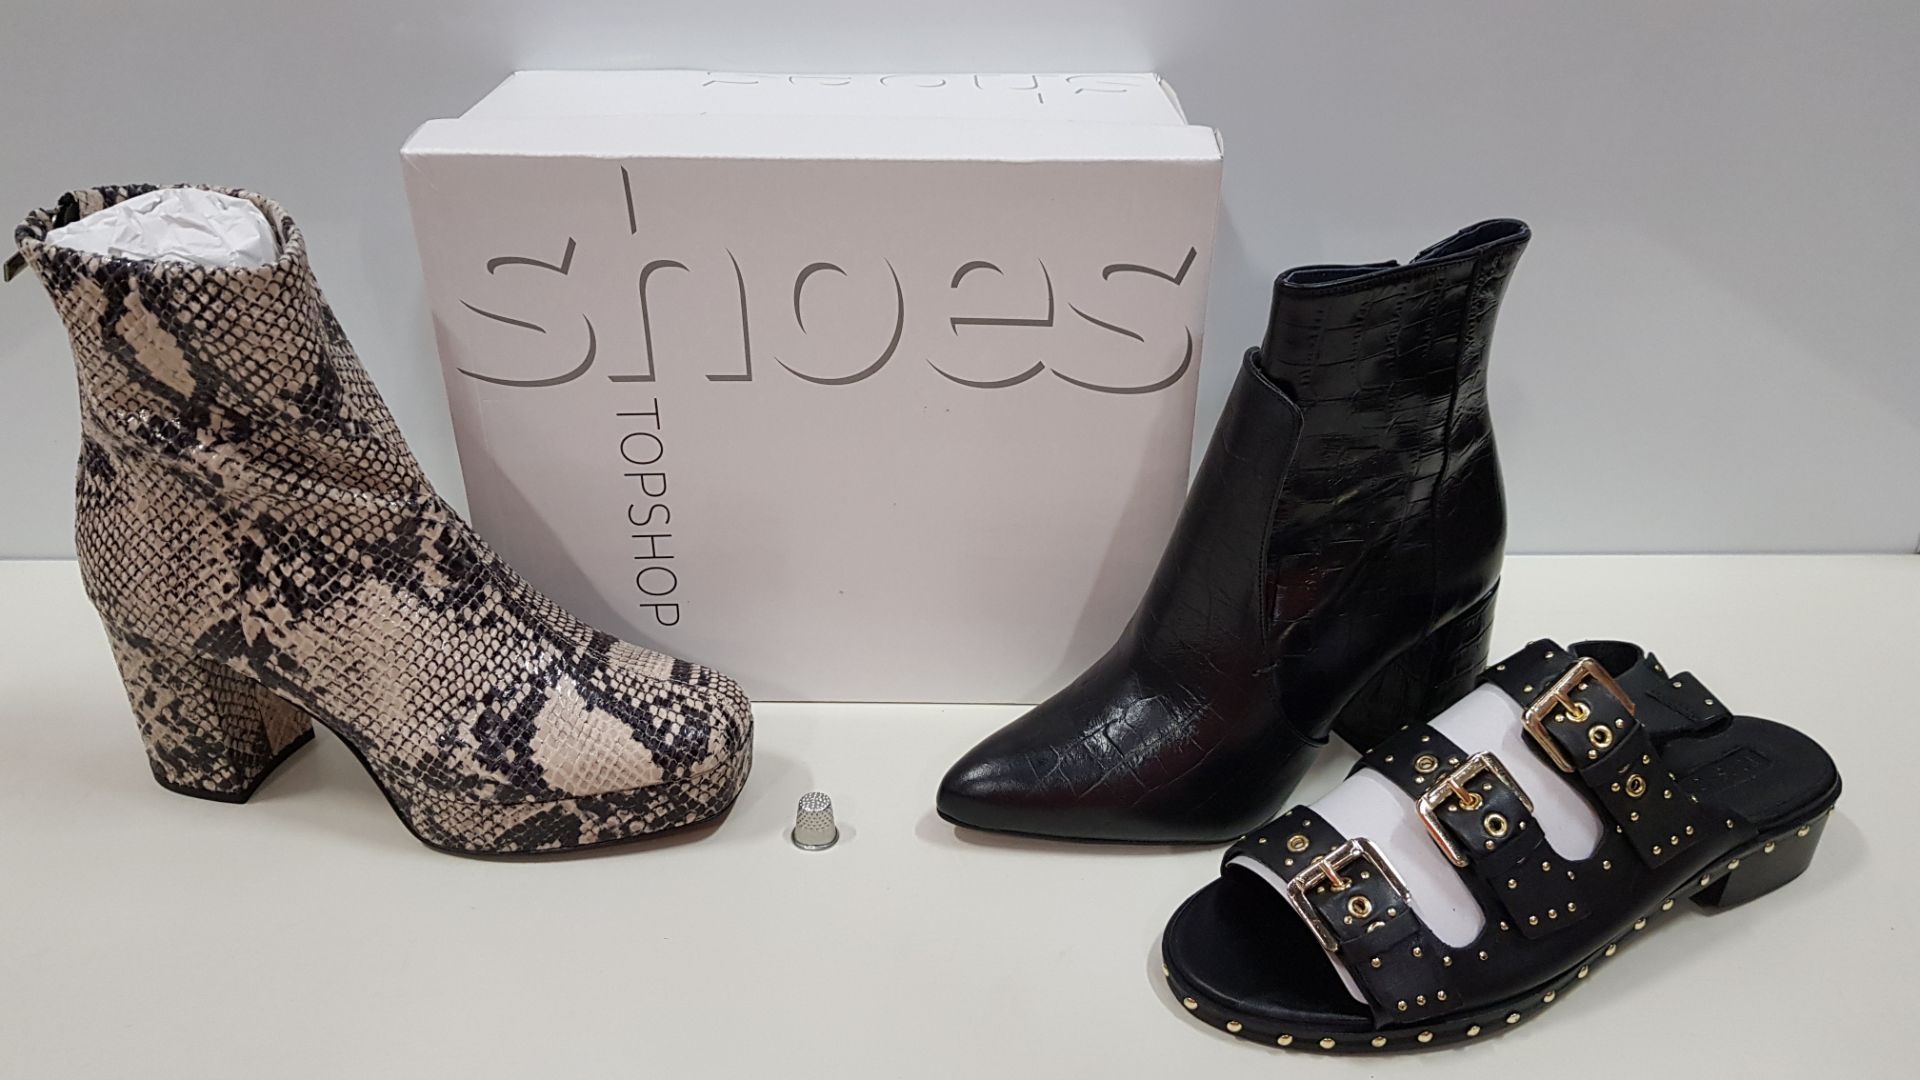 10 X BRAND NEW TOPSHOP SHOES IN VARIOUS STYLES AND SIZES - IE FRANK BLACK SHOES, MARGARITA SNAKE